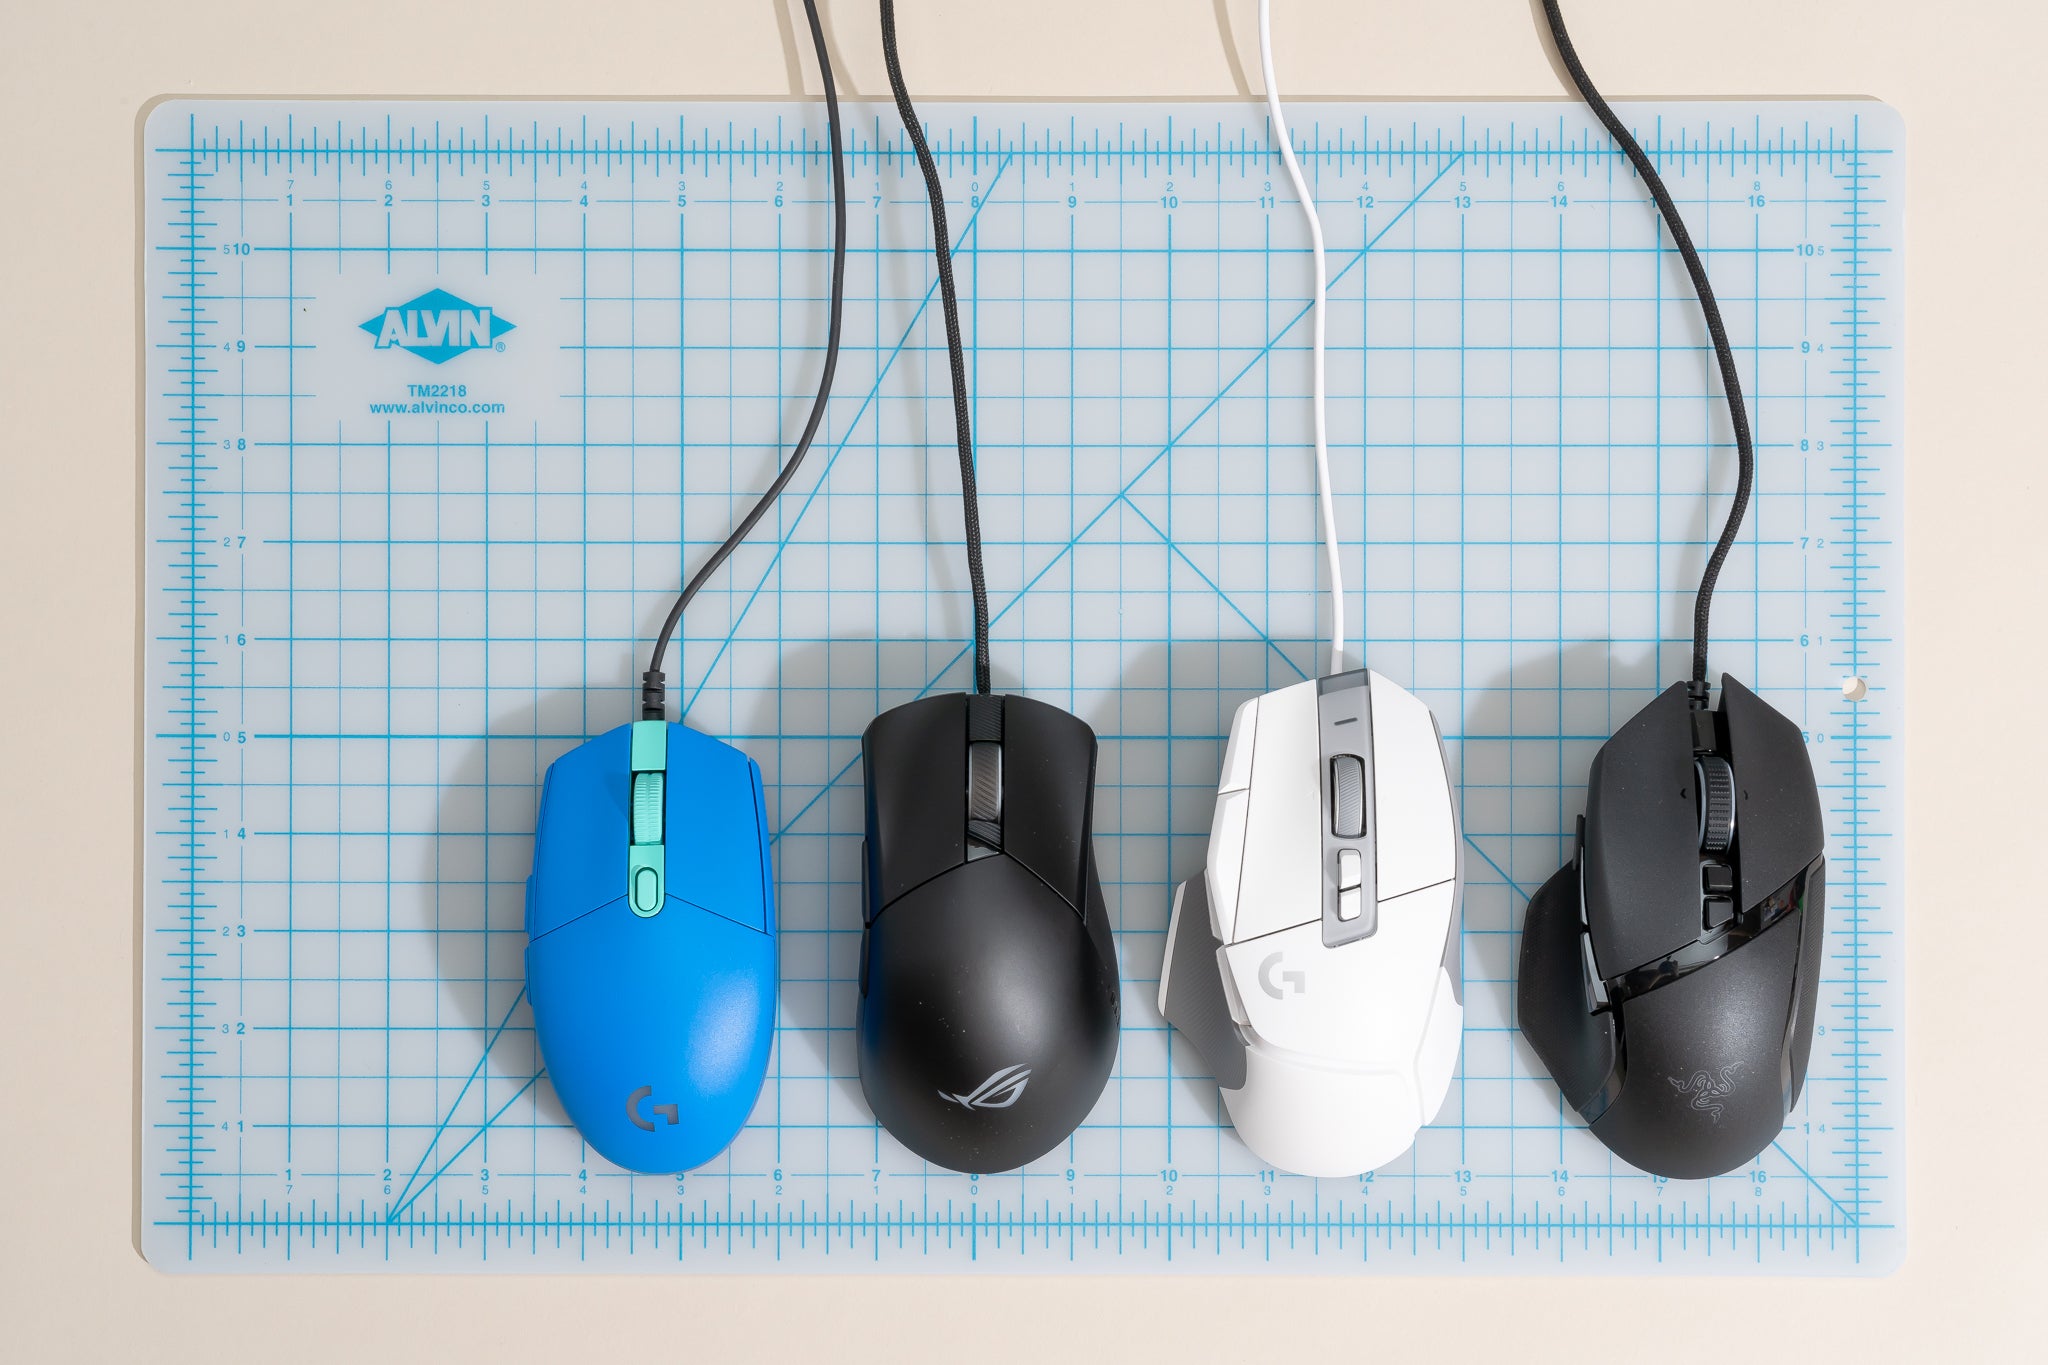 If possible, connect a different mouse to your computer.
Test the new mouse to see if the movement and responsiveness improve.